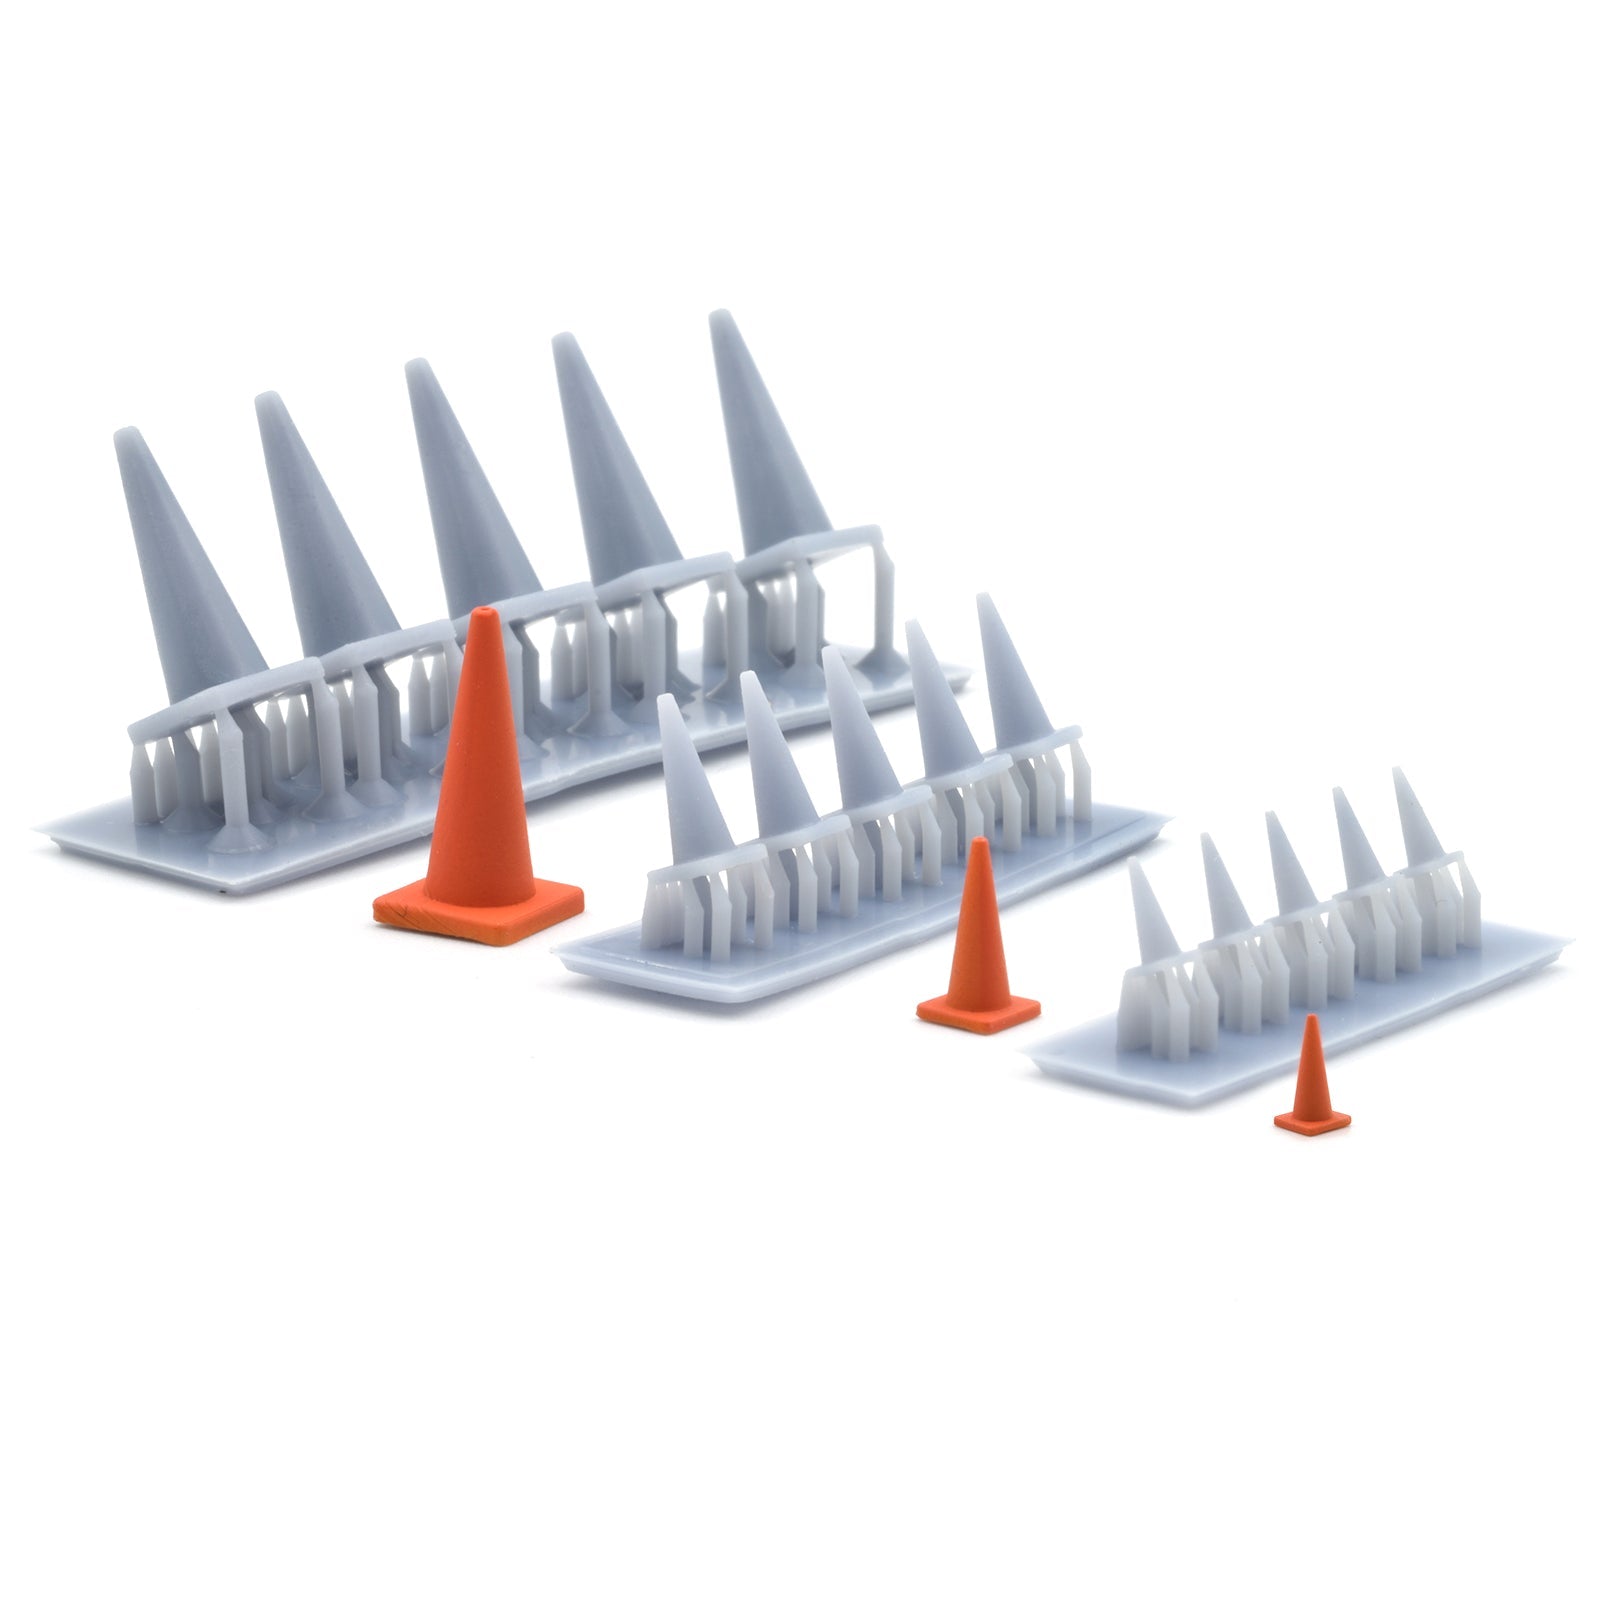 Traffic Cones, HO Scale, by Scientific, Package of 24